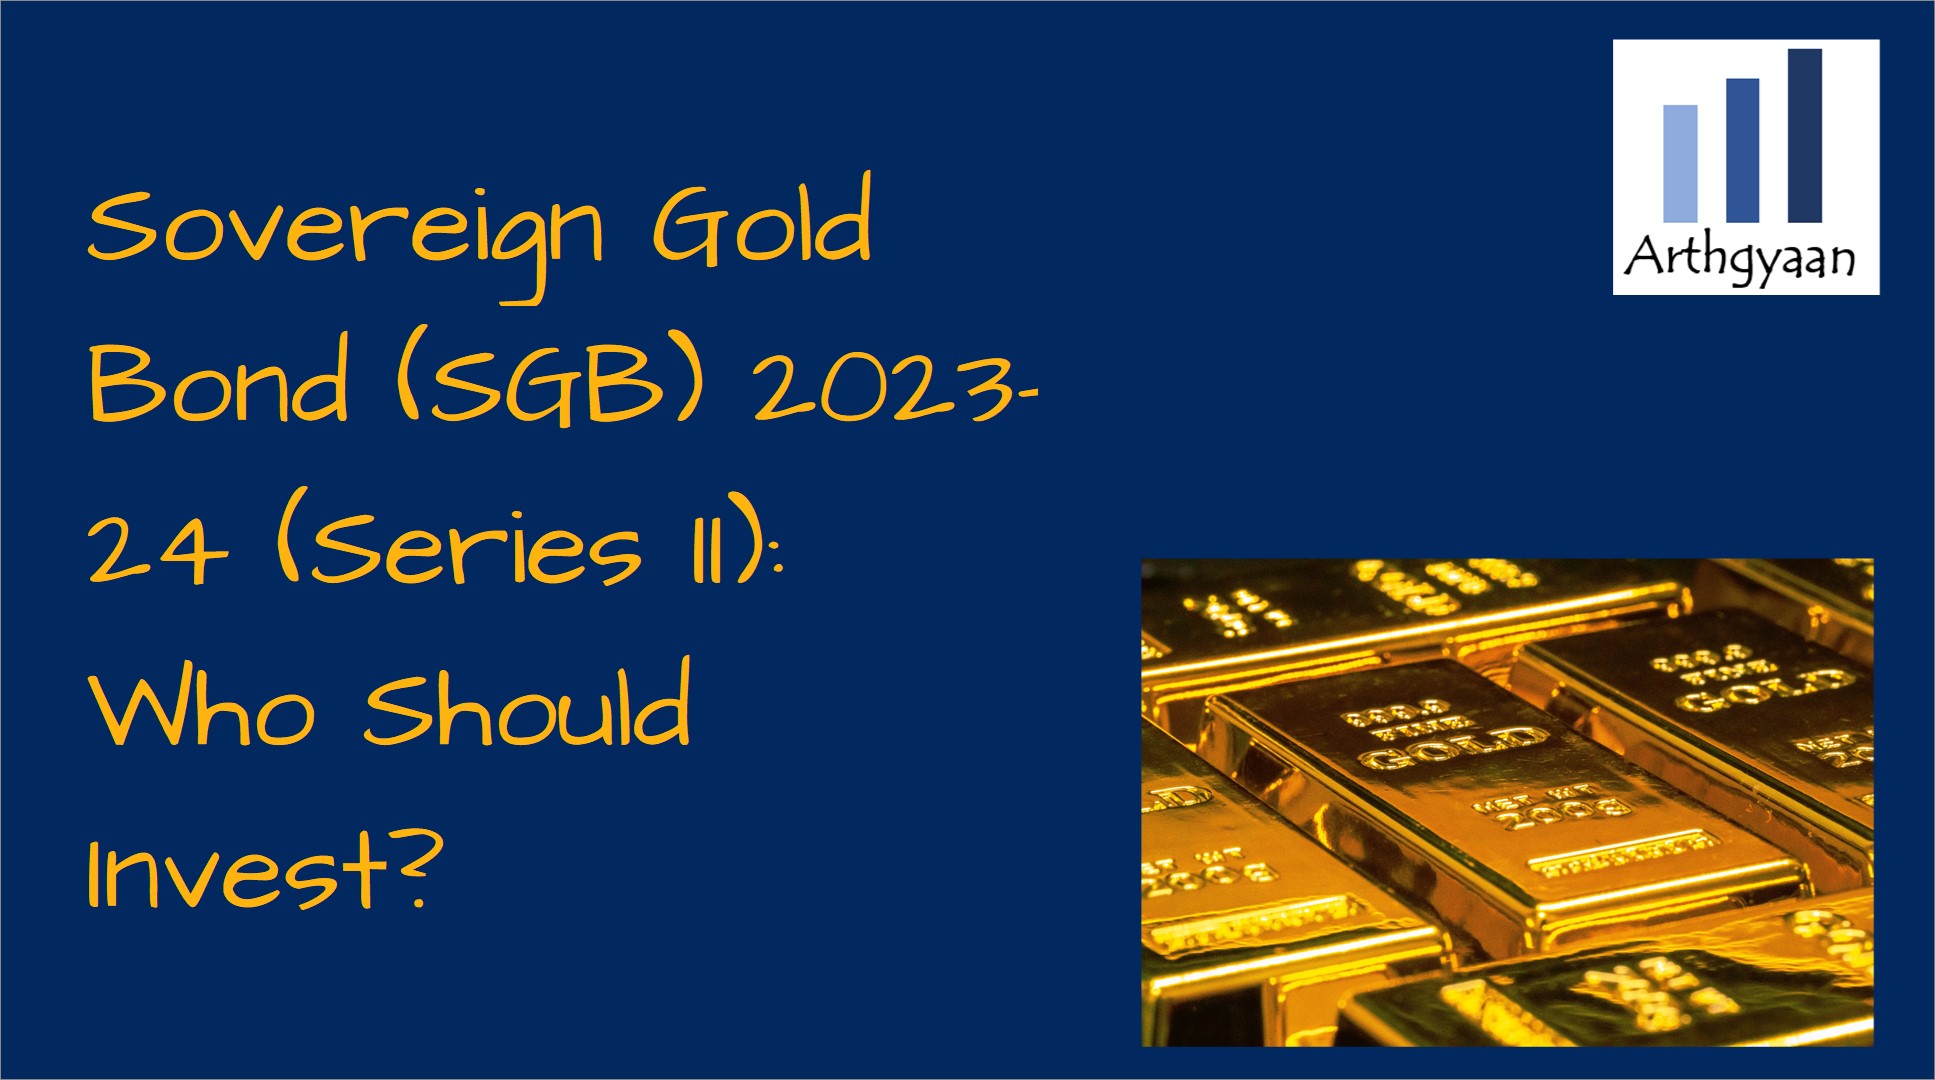 <p>Sovereign Gold Bond (SGB) 2023-24 (Series II): know all the details about it to decide if you should invest.</p>

